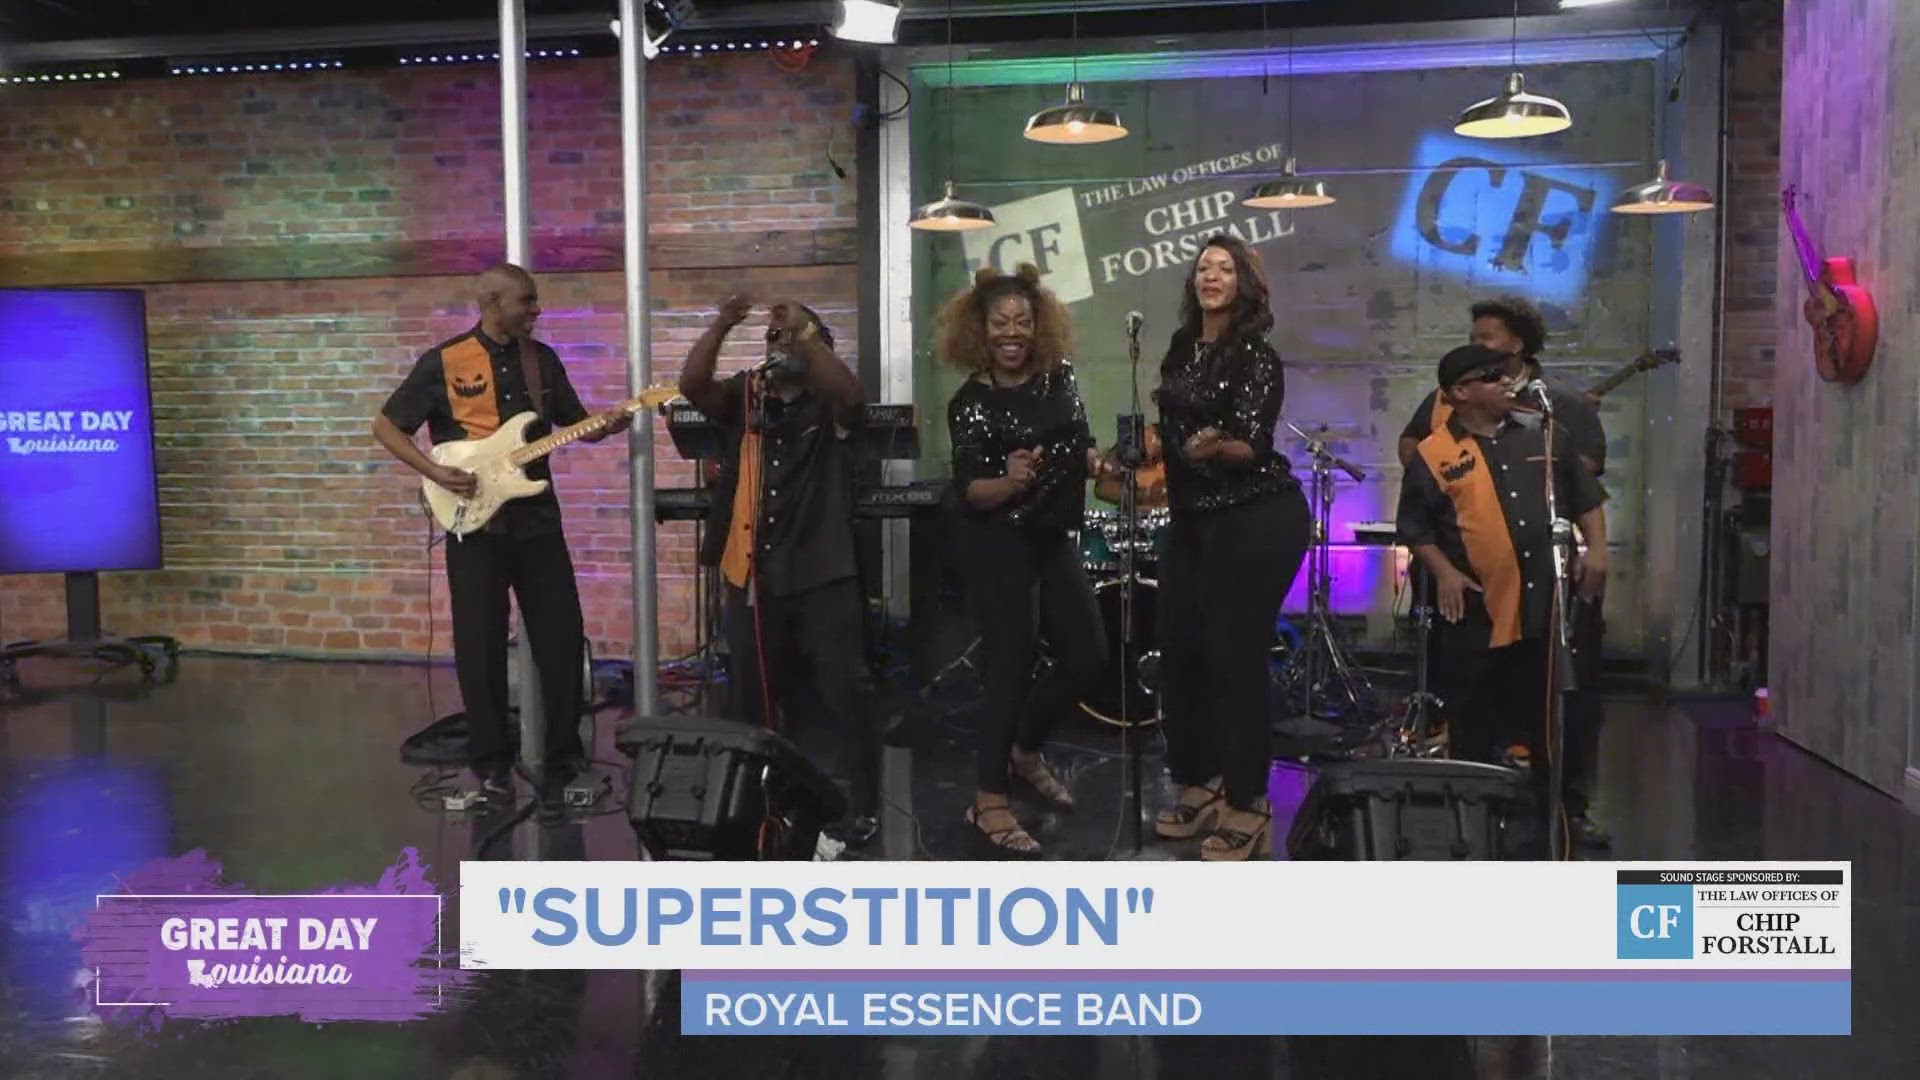 We wrap up our Halloween song with another great song from The Royal Essence Band!